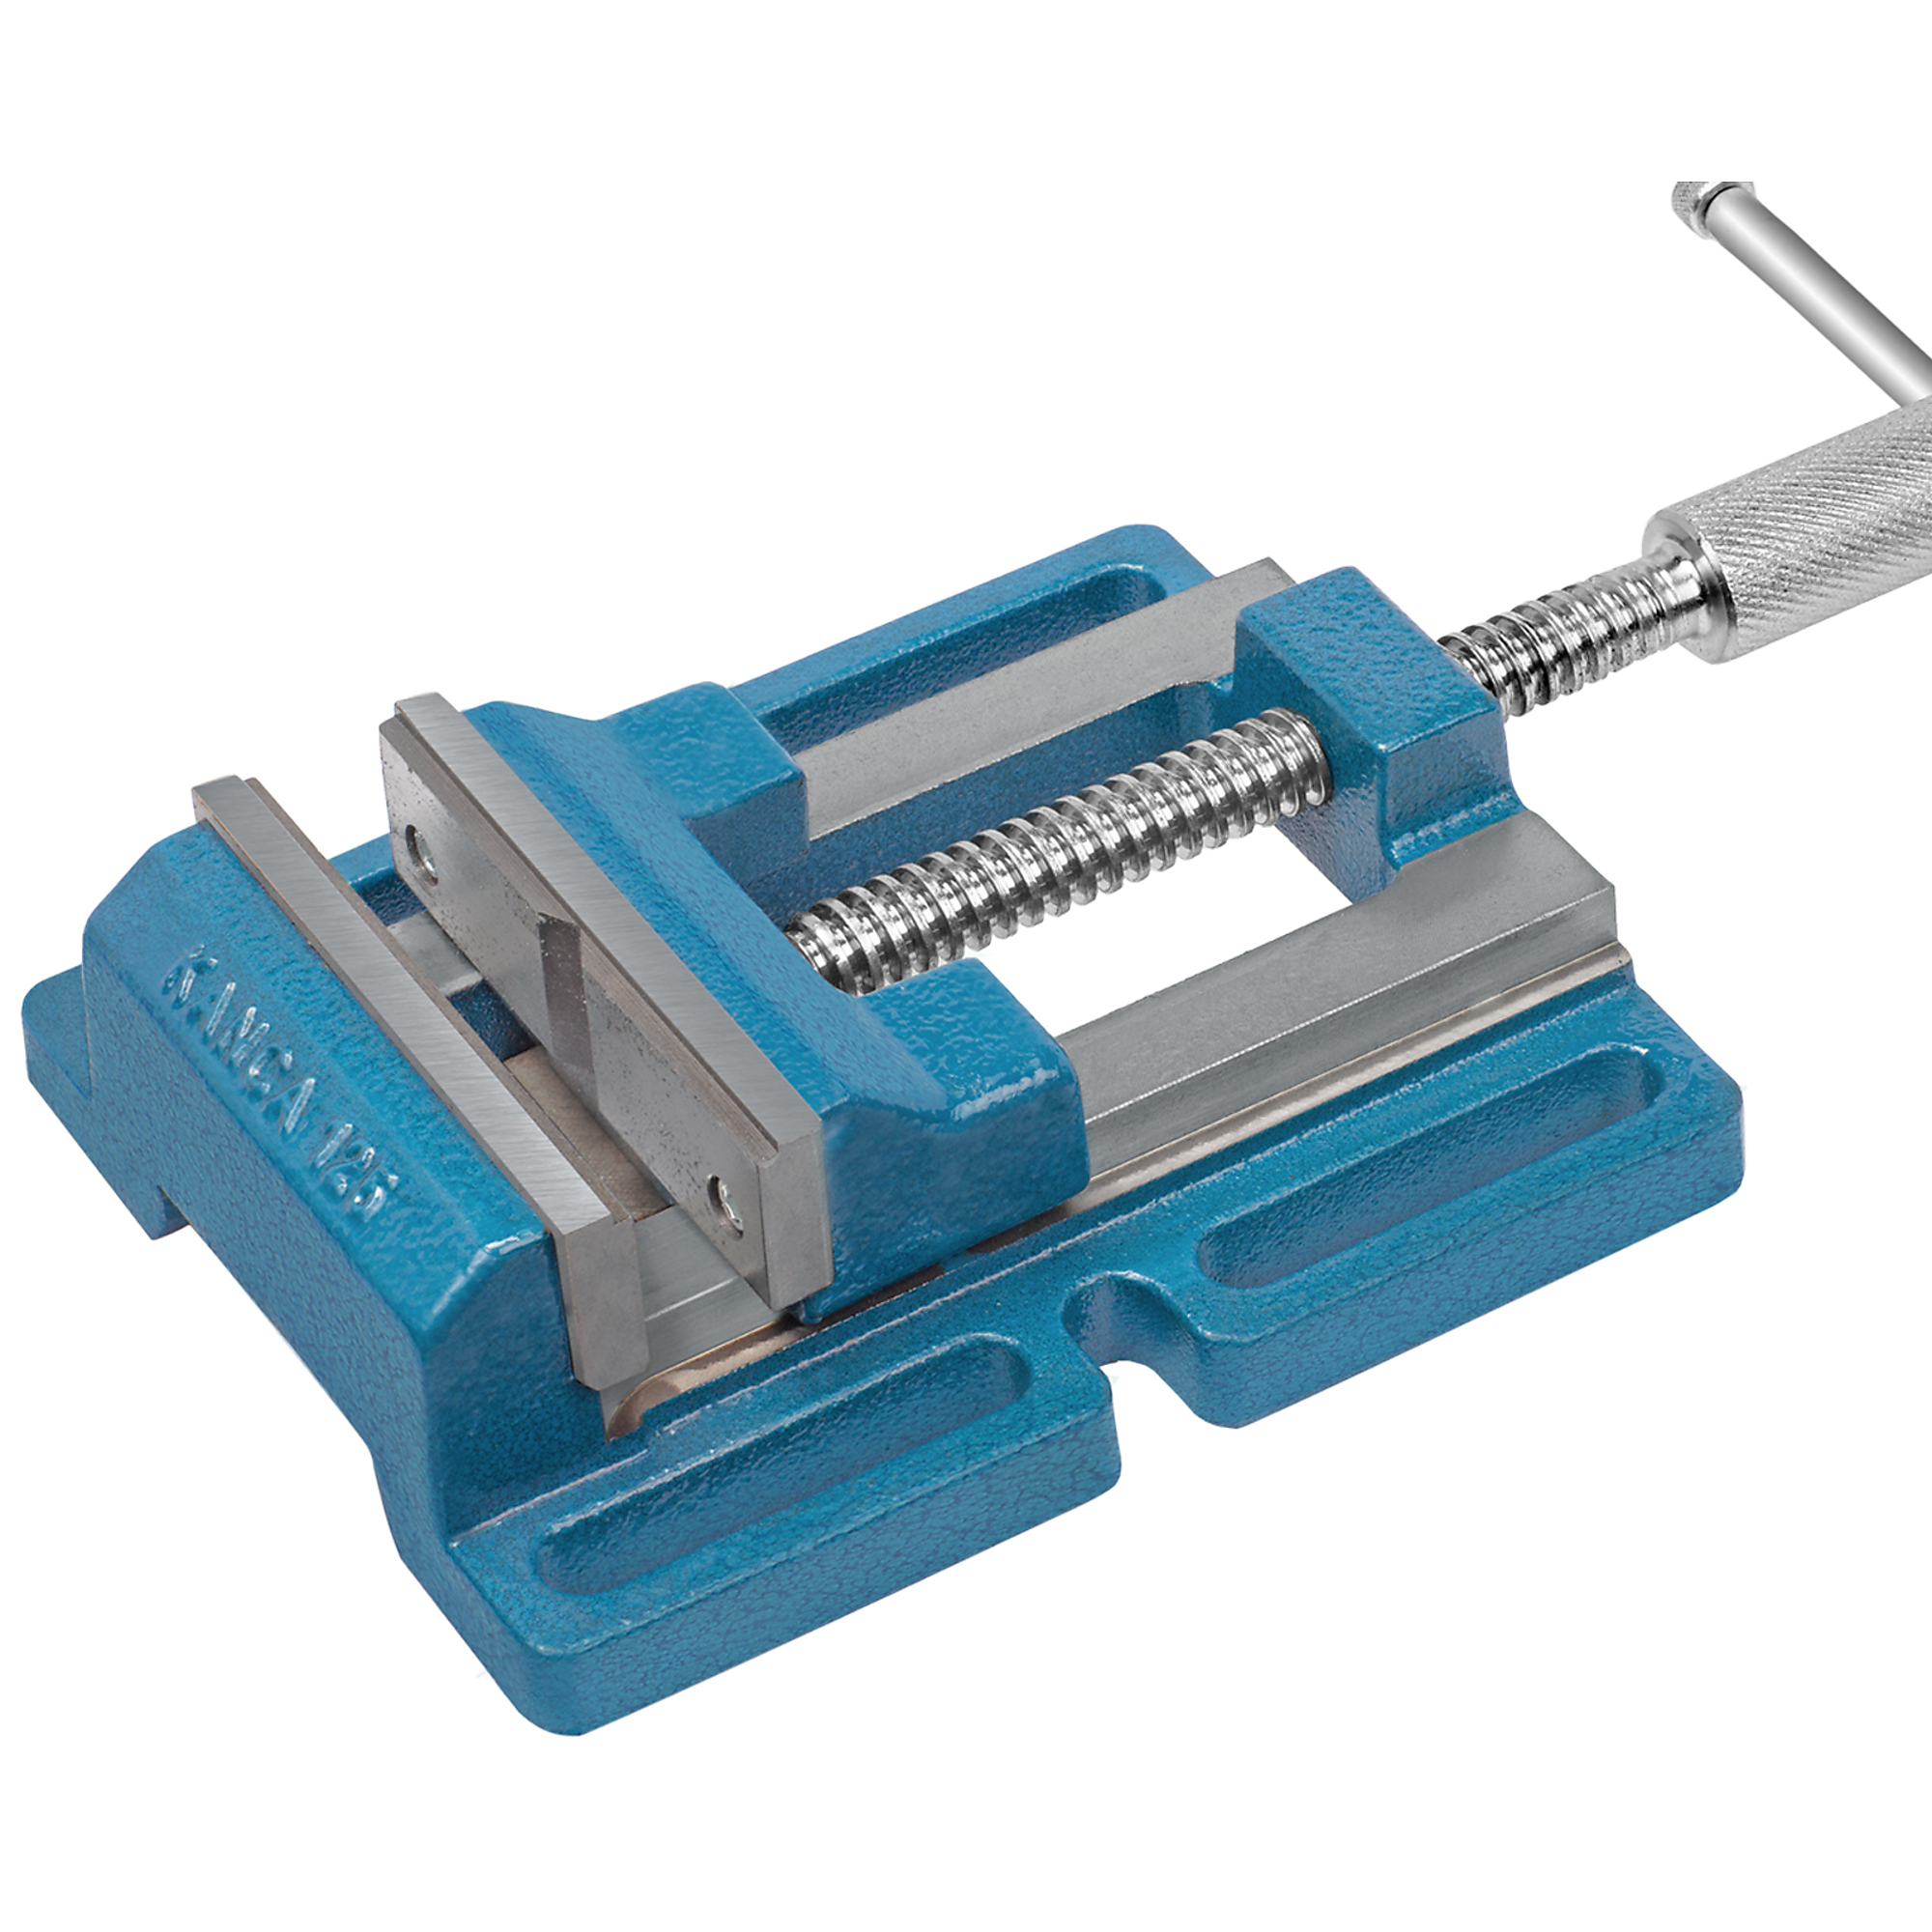 KANCA, DRILL PRESS VISE 80 MM - 3.2Inch, Jaw Width 3.2 in, Jaw Capacity 3 in, Model Drill Press Vise